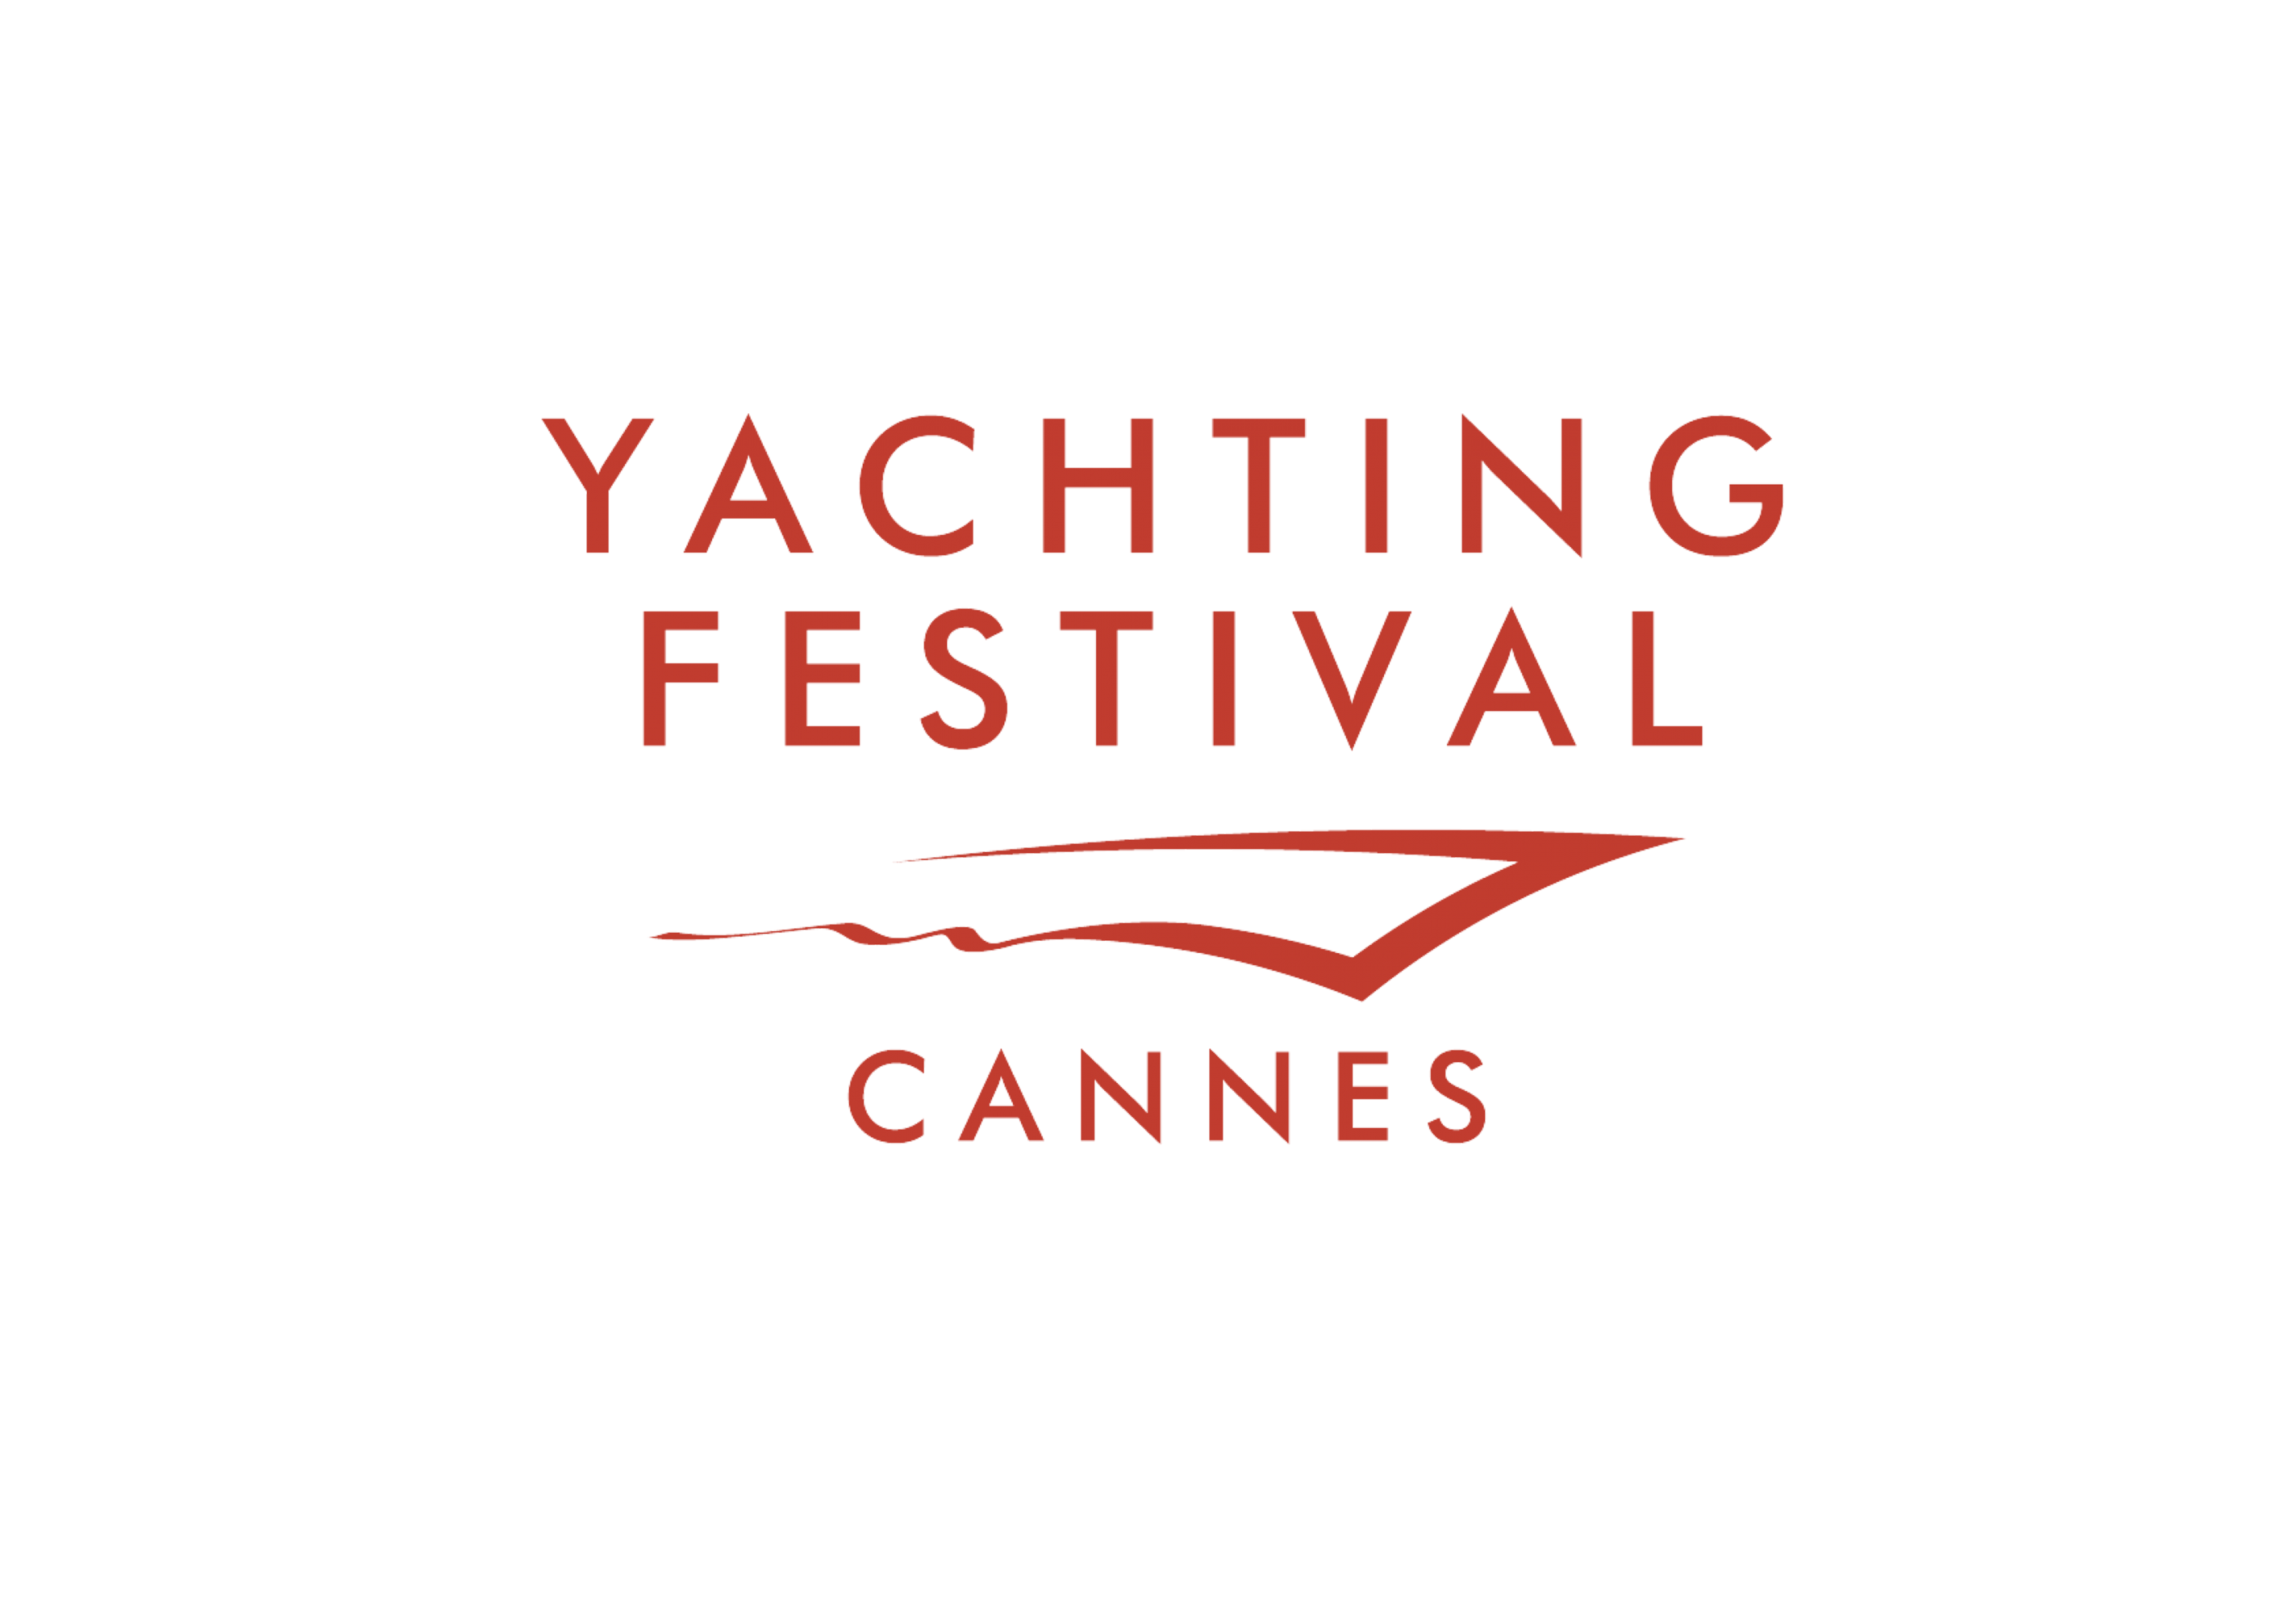 Yachting Festiveal Cannes 07.09.- 12.09.2022